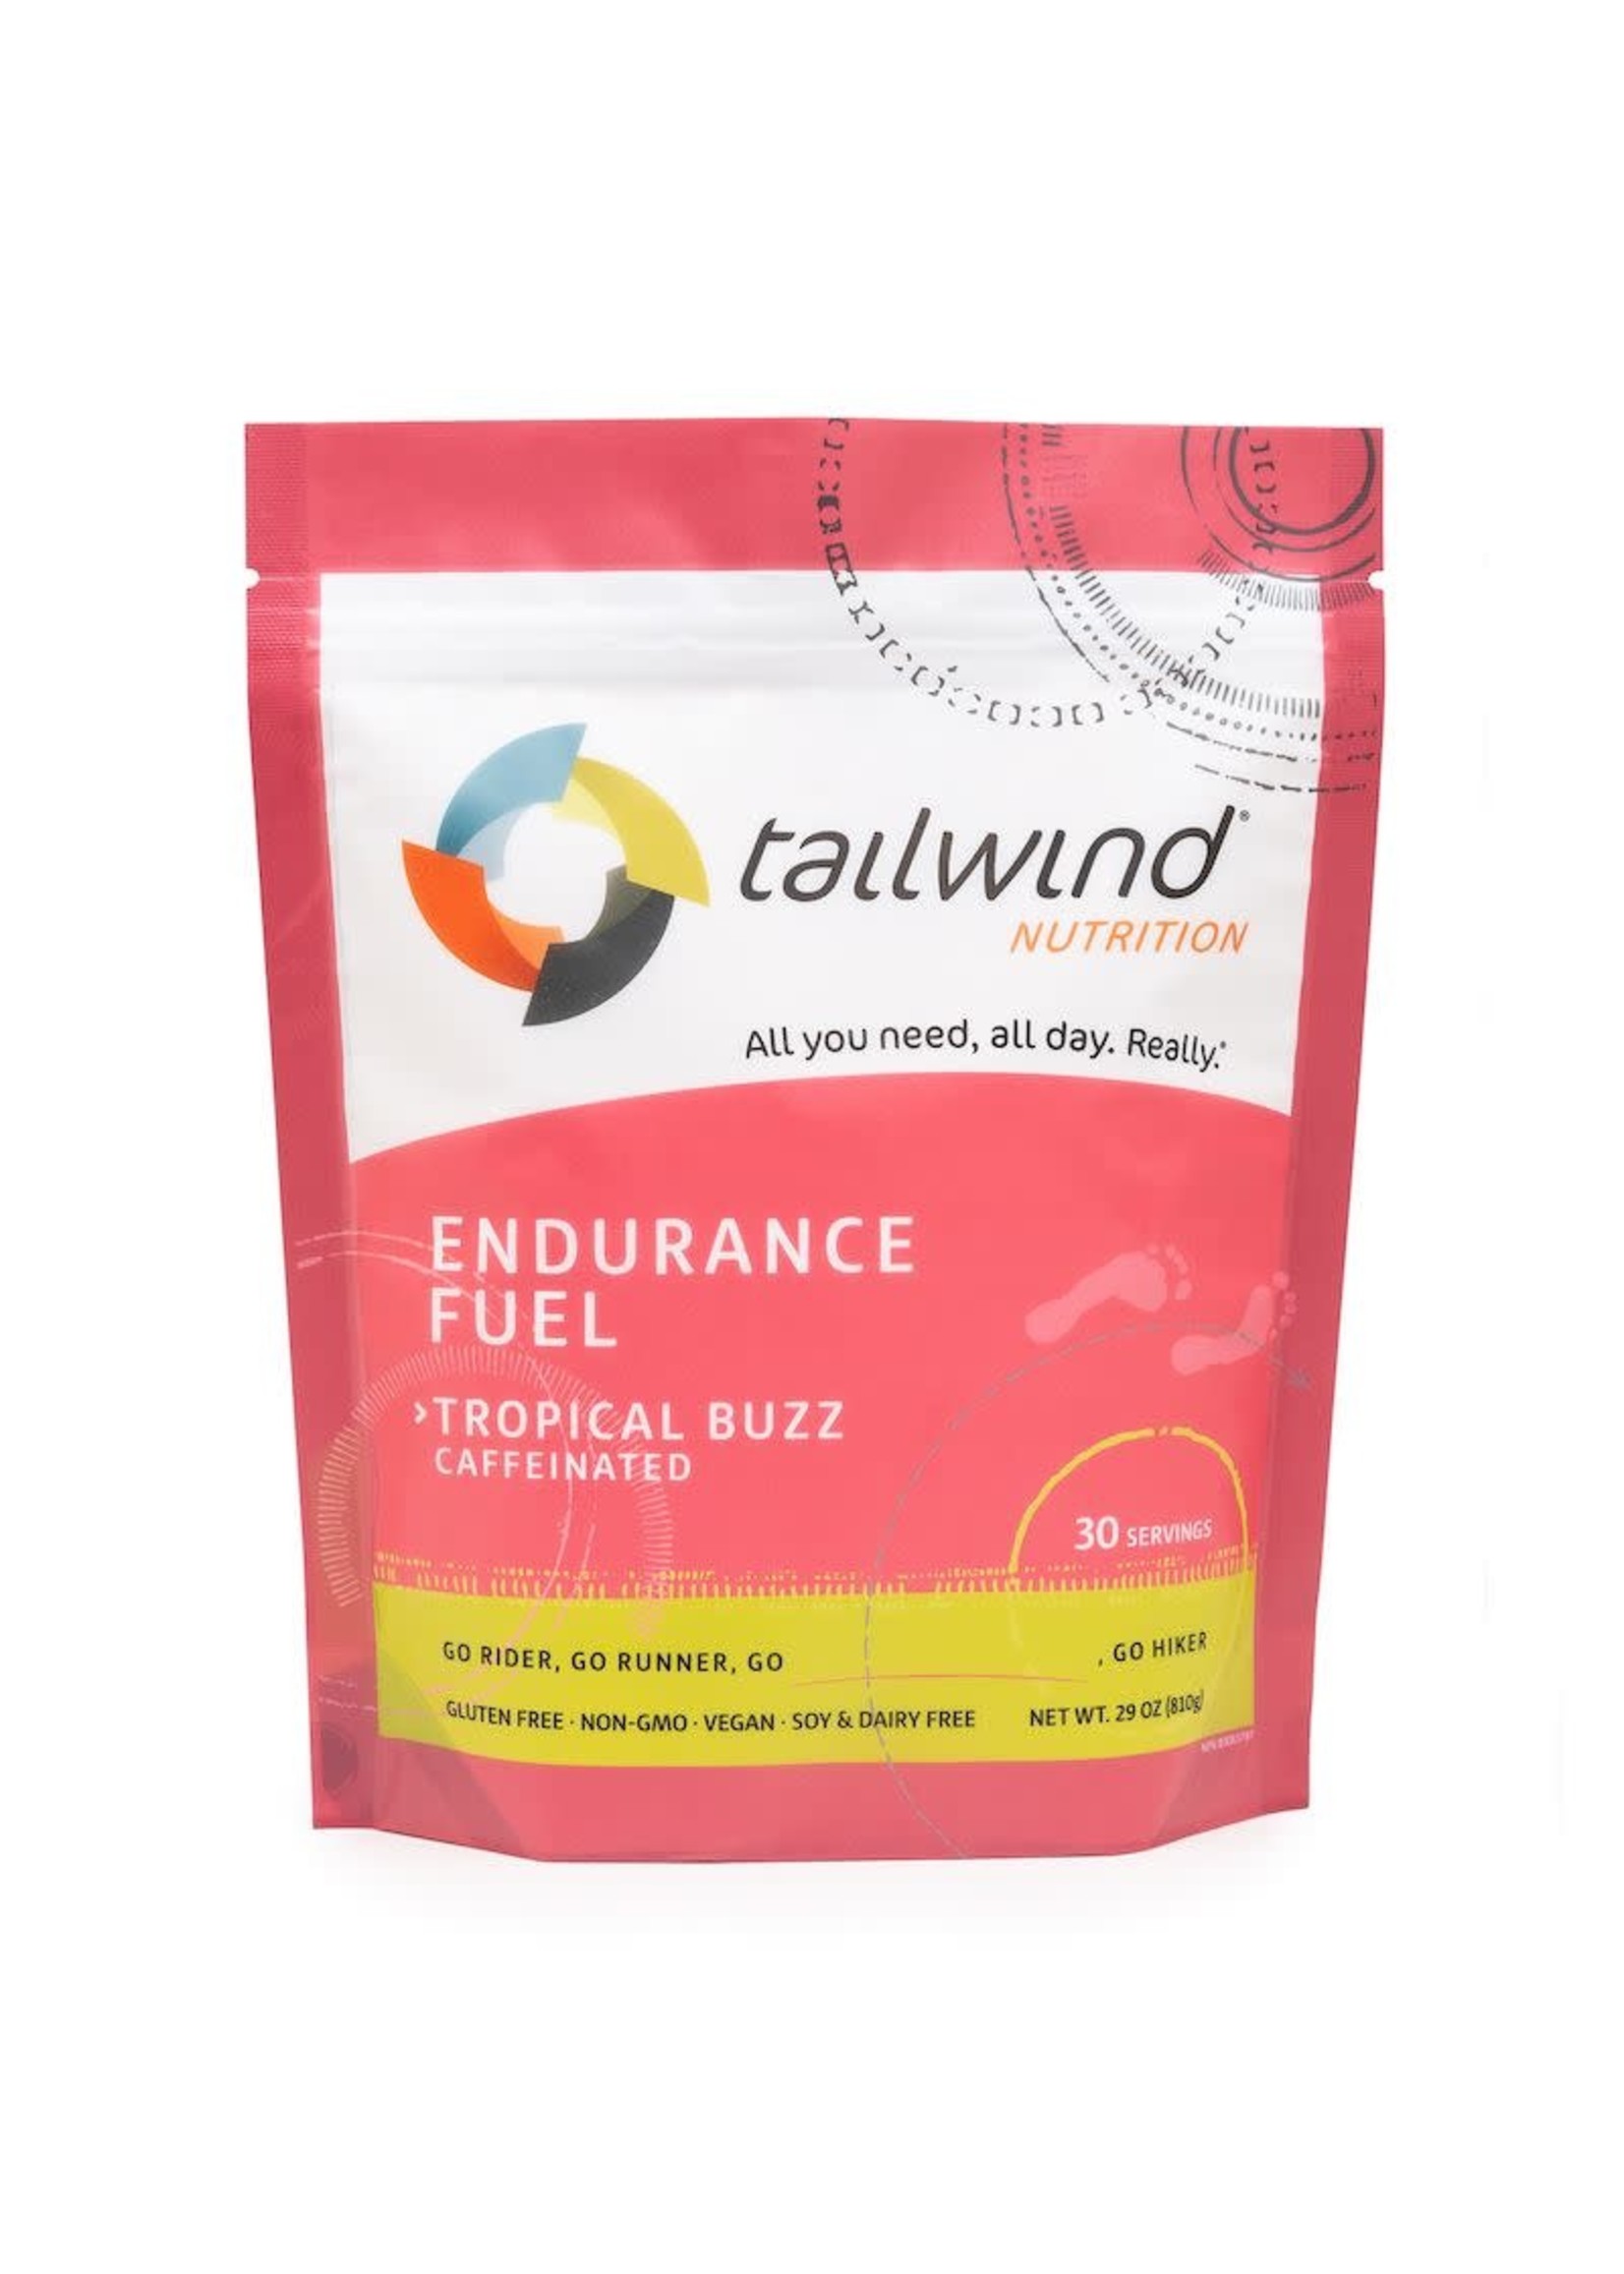 Tailwind Nutrition Endurance Fuel Tailwind Caffeinated Tropical Buzz (30 servings)